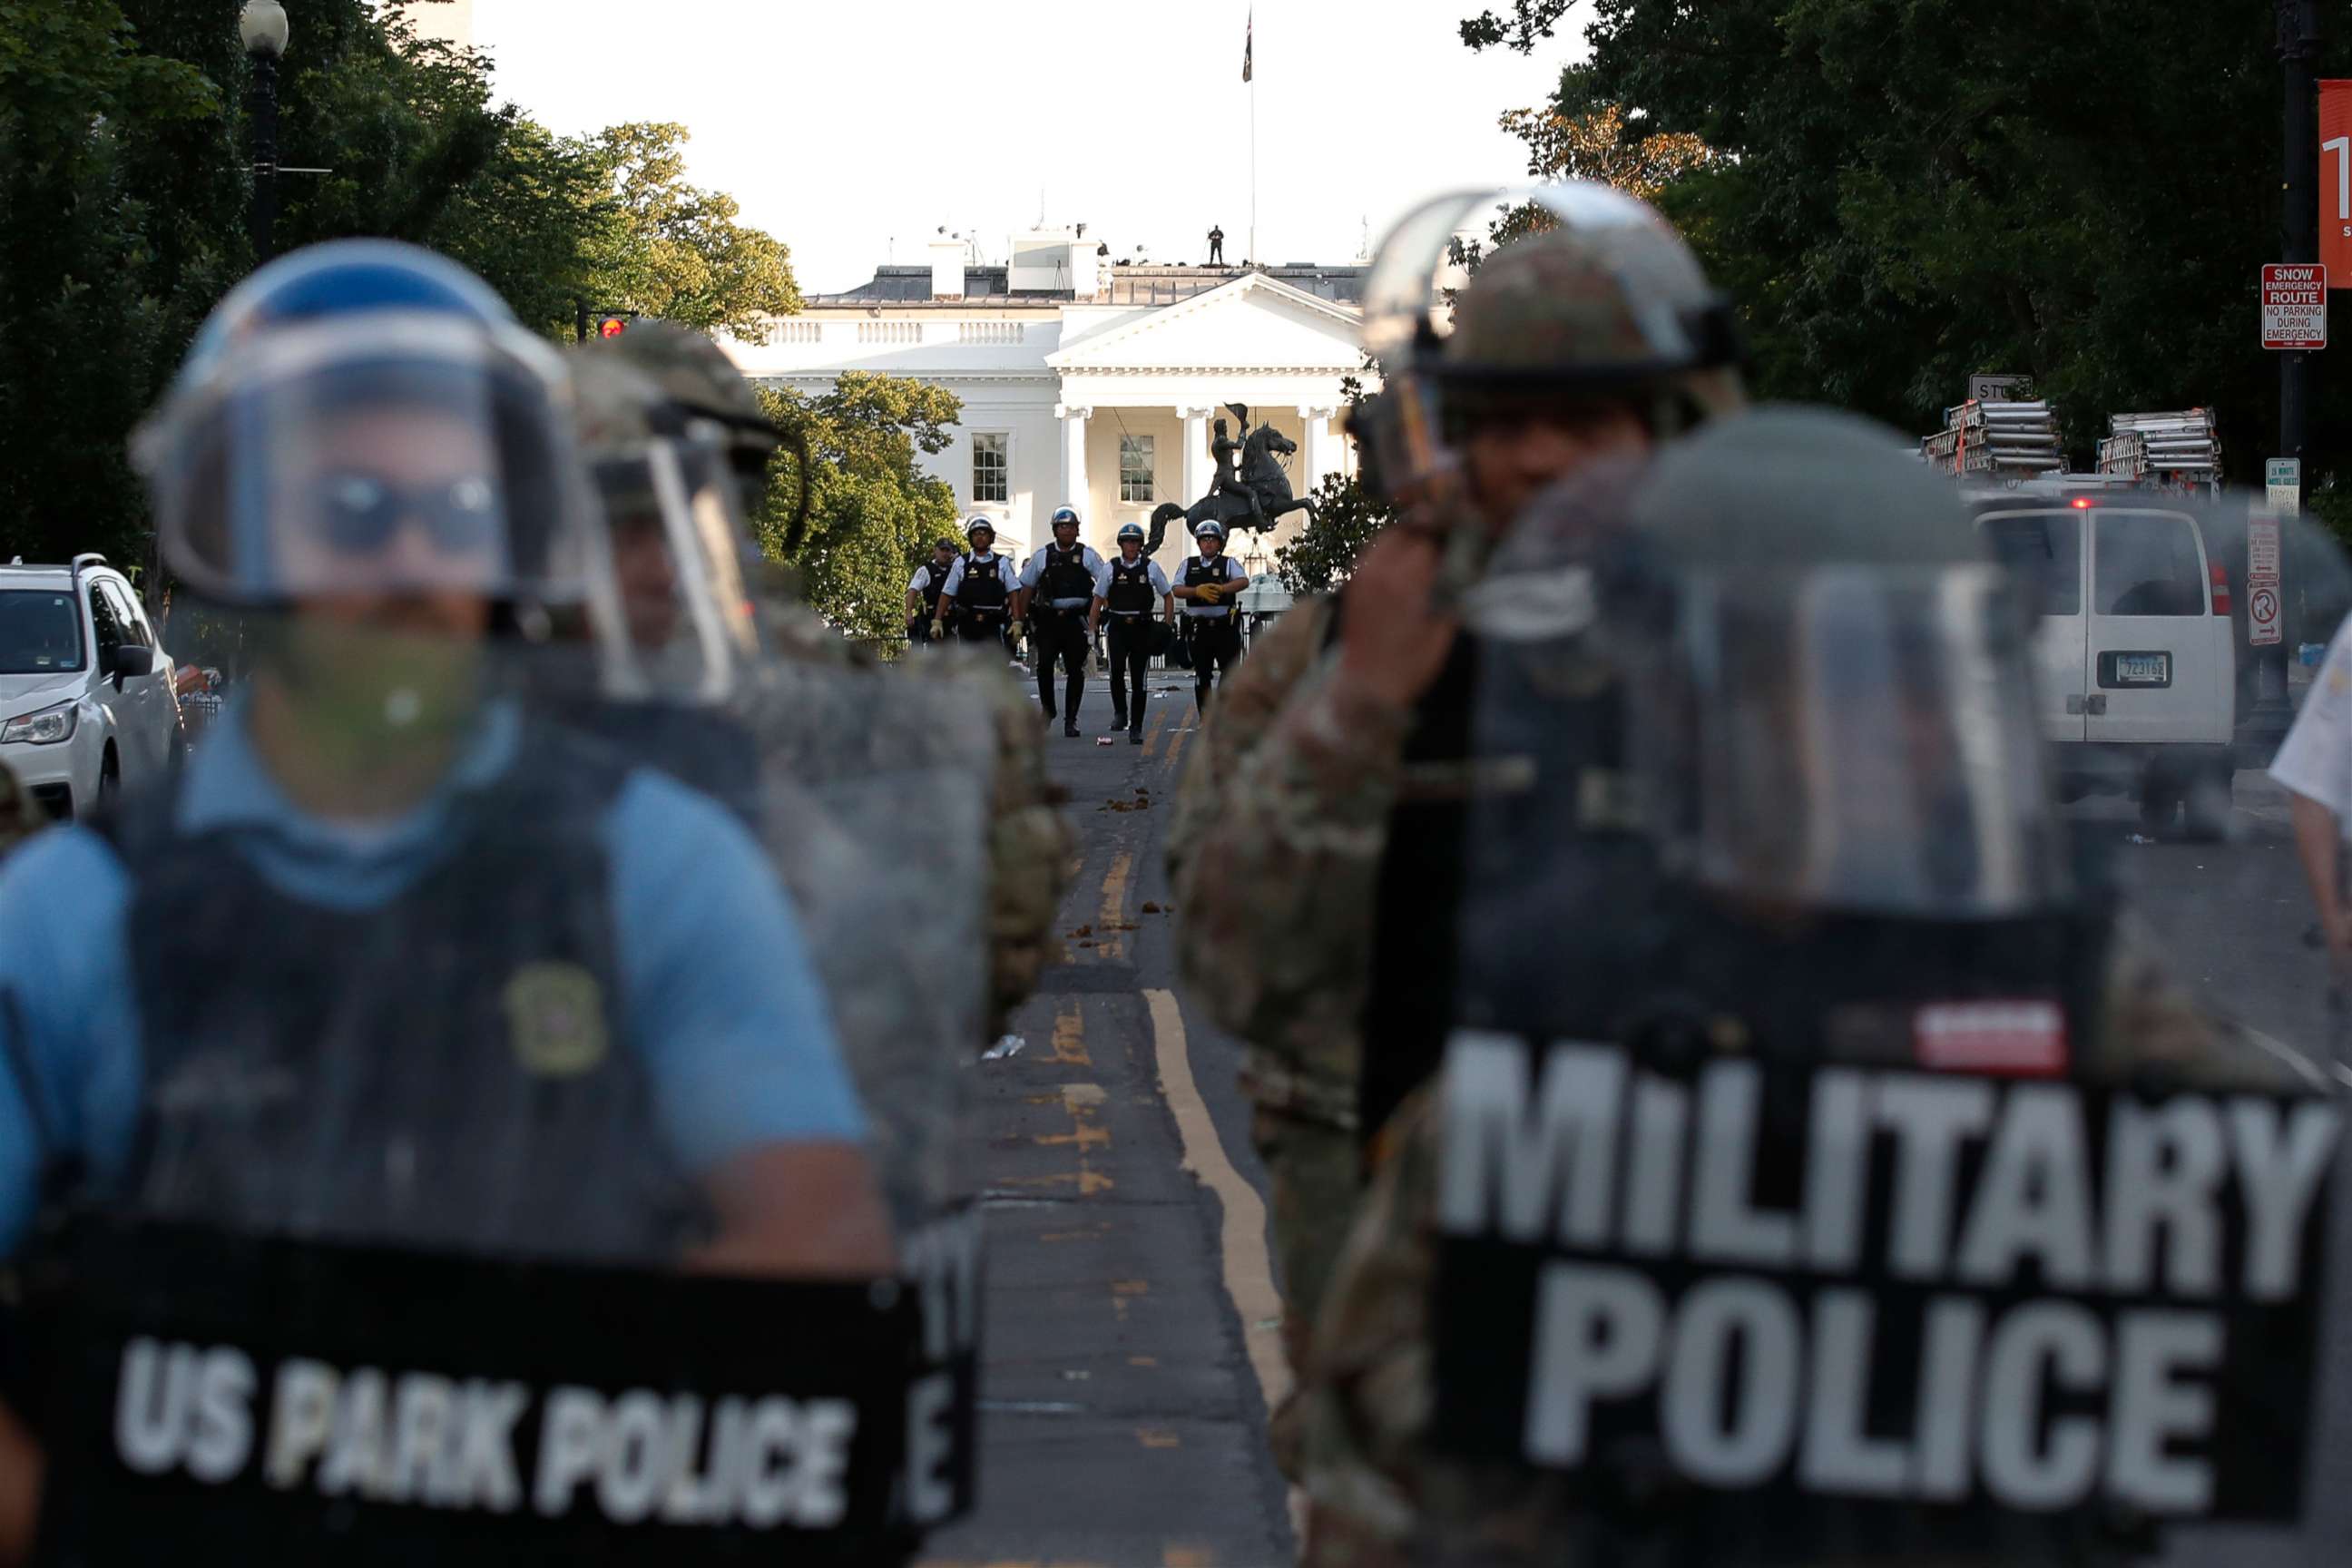 PHOTO: Police clear the area around Lafayette Park and the White House in Washington, as demonstrators gather to protest the death of George Floyd, June 1, 2020.